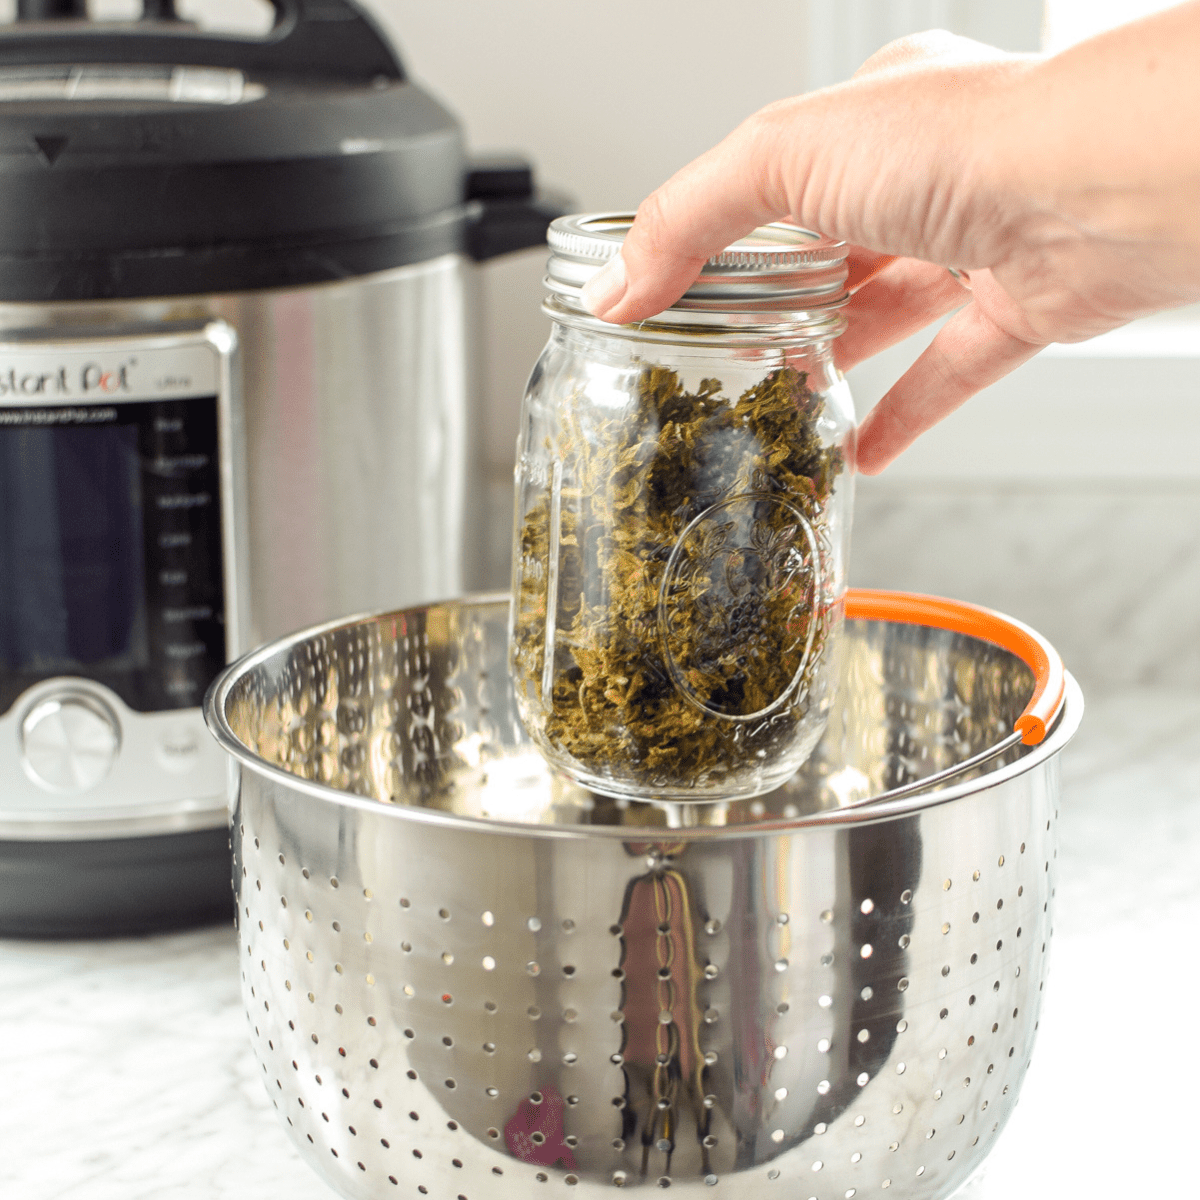 https://emilykylenutrition.com/wp-content/uploads/2022/10/How-to-Decarb-in-an-Instant-Pot.png